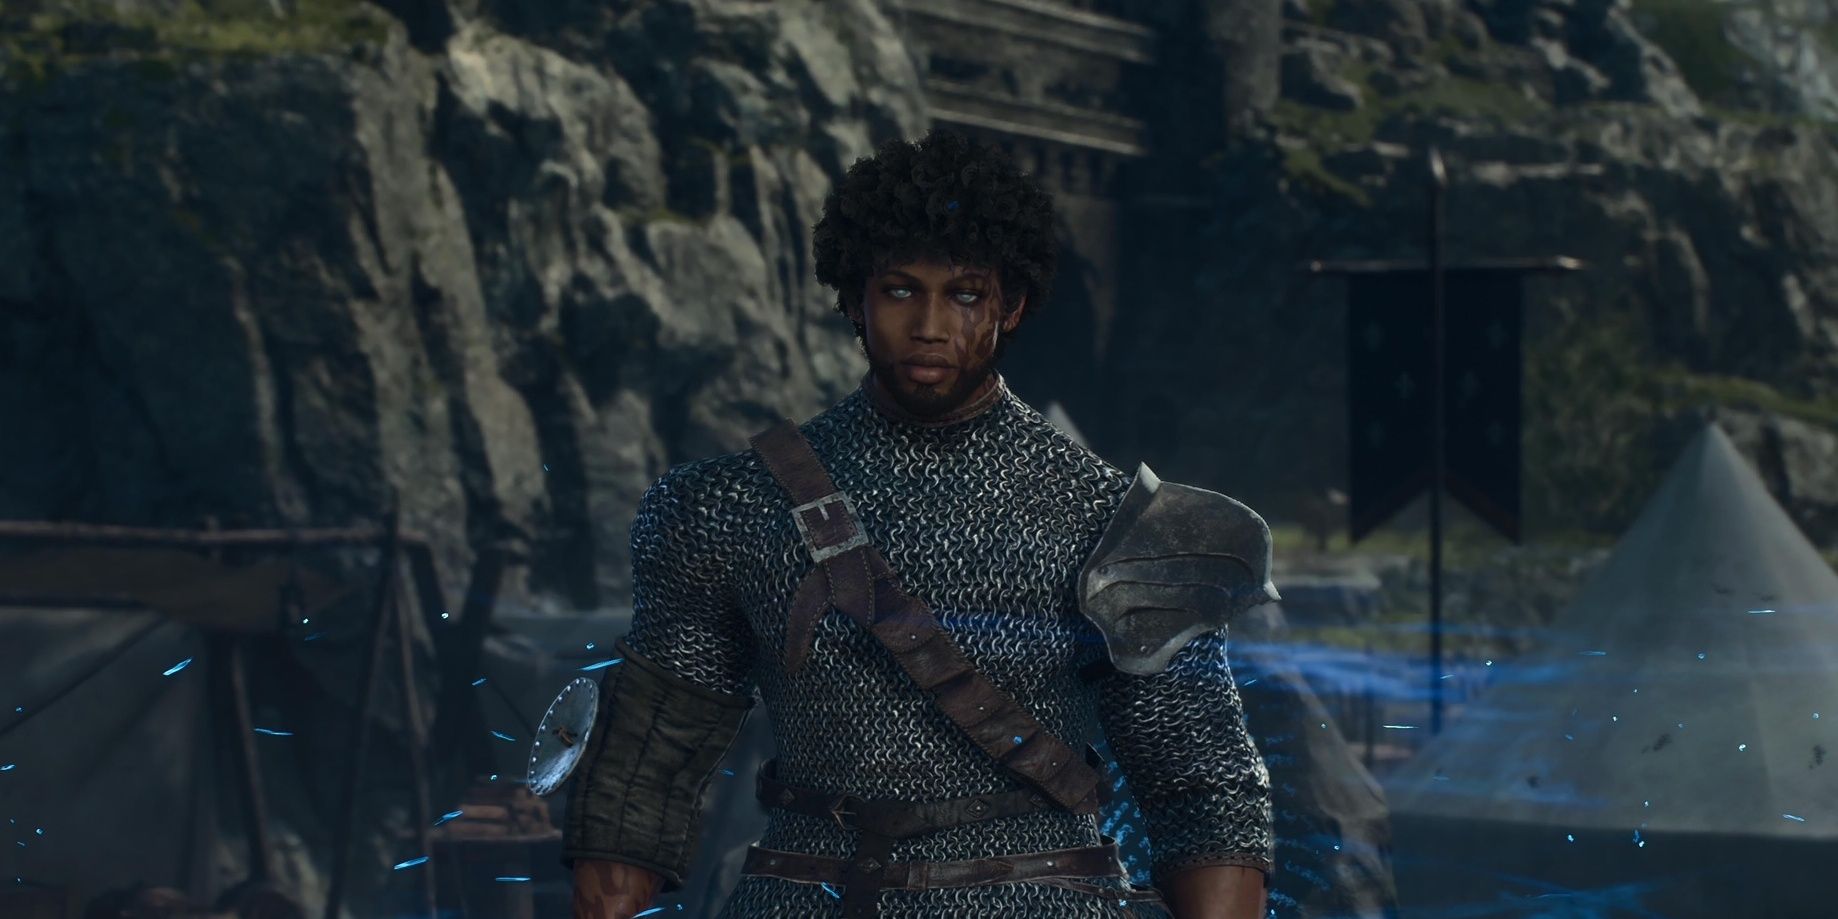 The Arisen meets his Pawn in Dragon's Dogma 2